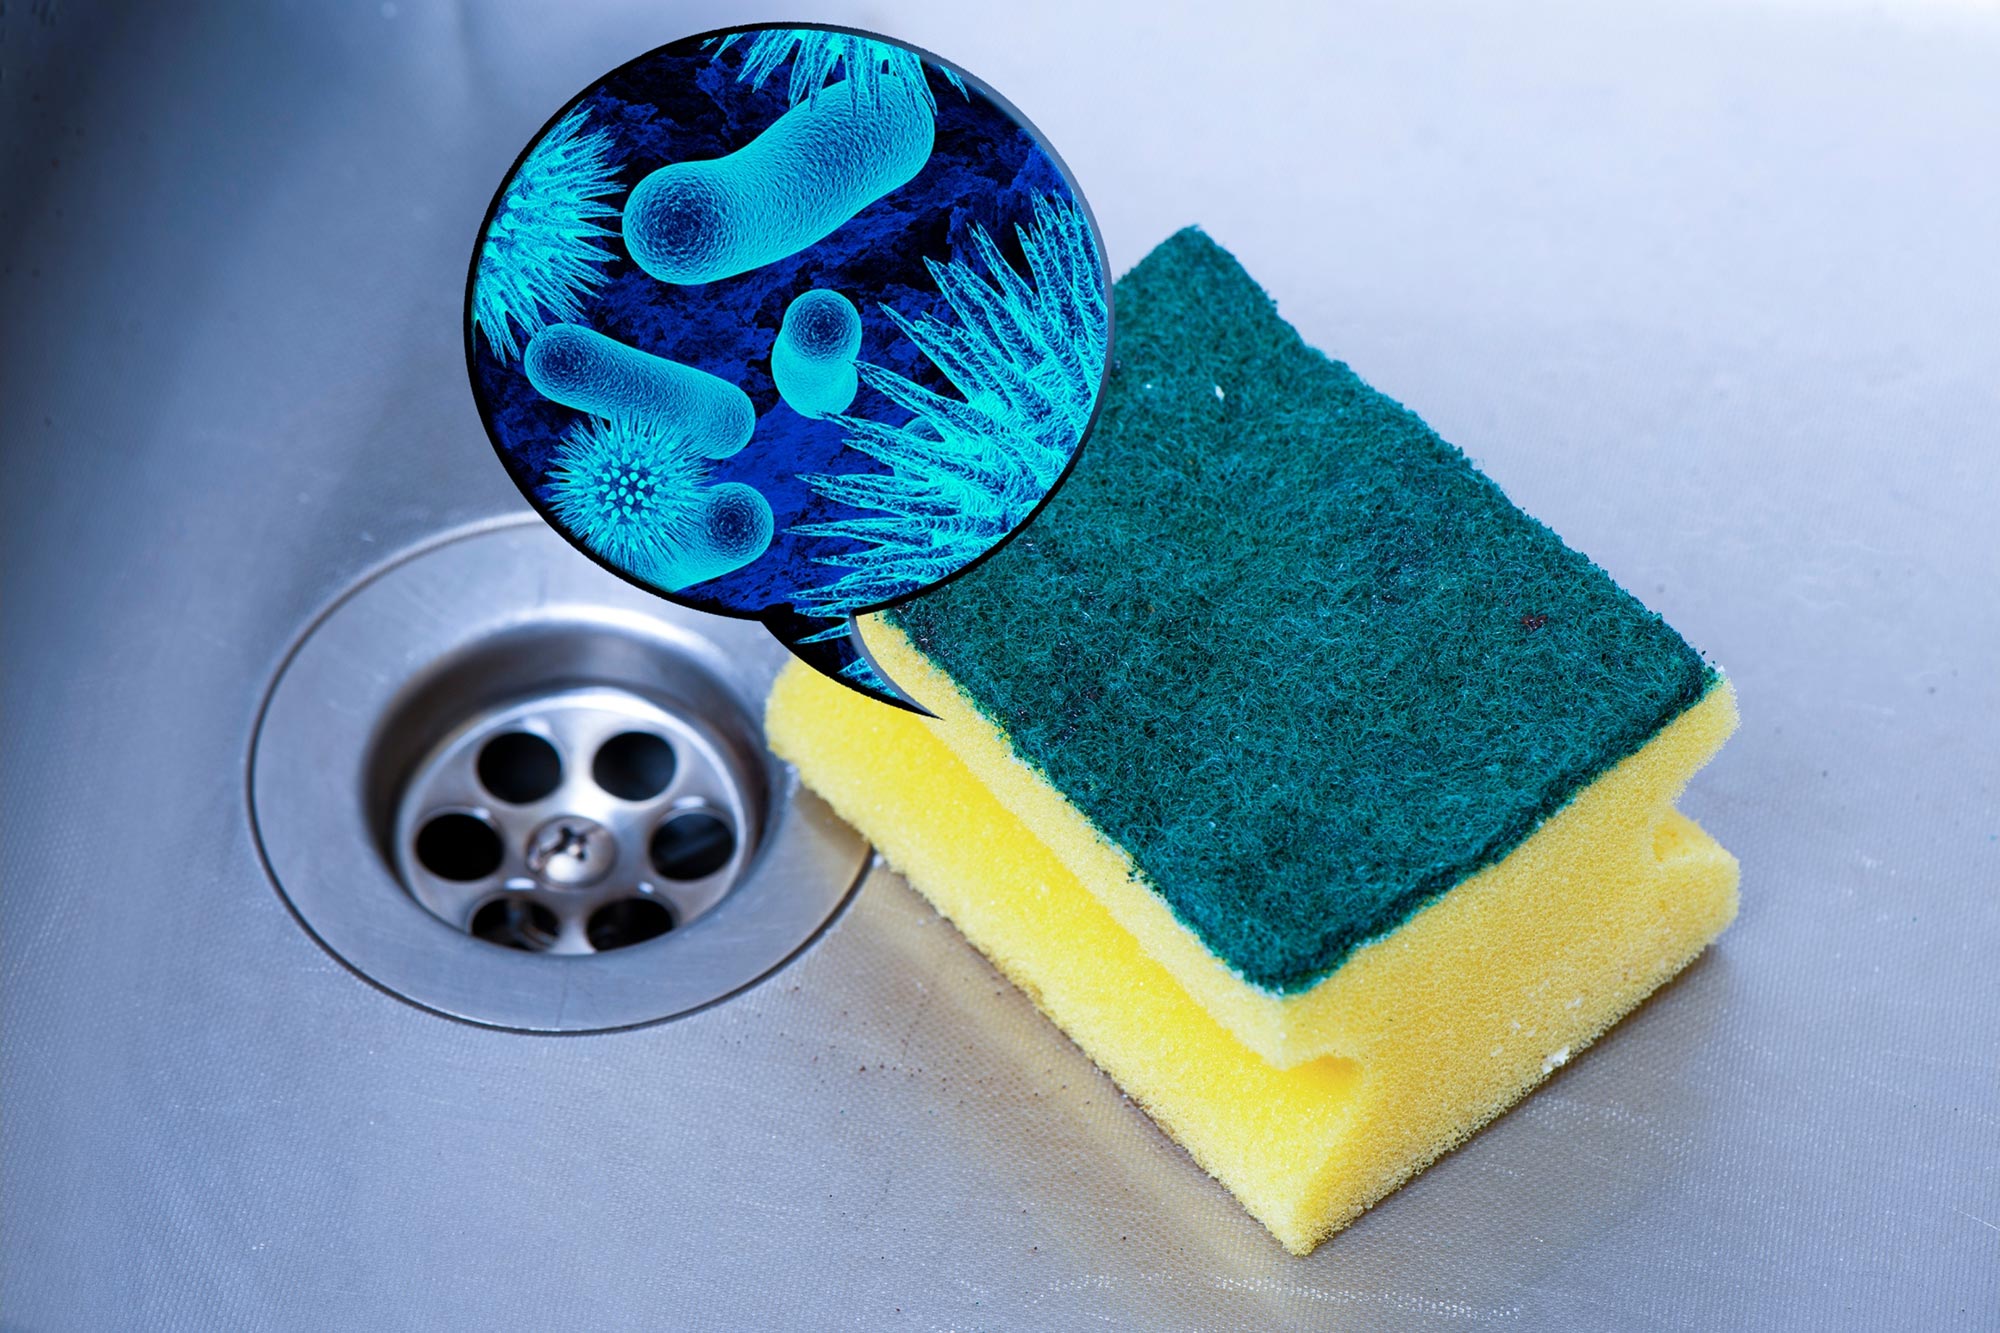 Your Kitchen Sponge Is a Better Home for Bacteria Than a Petri